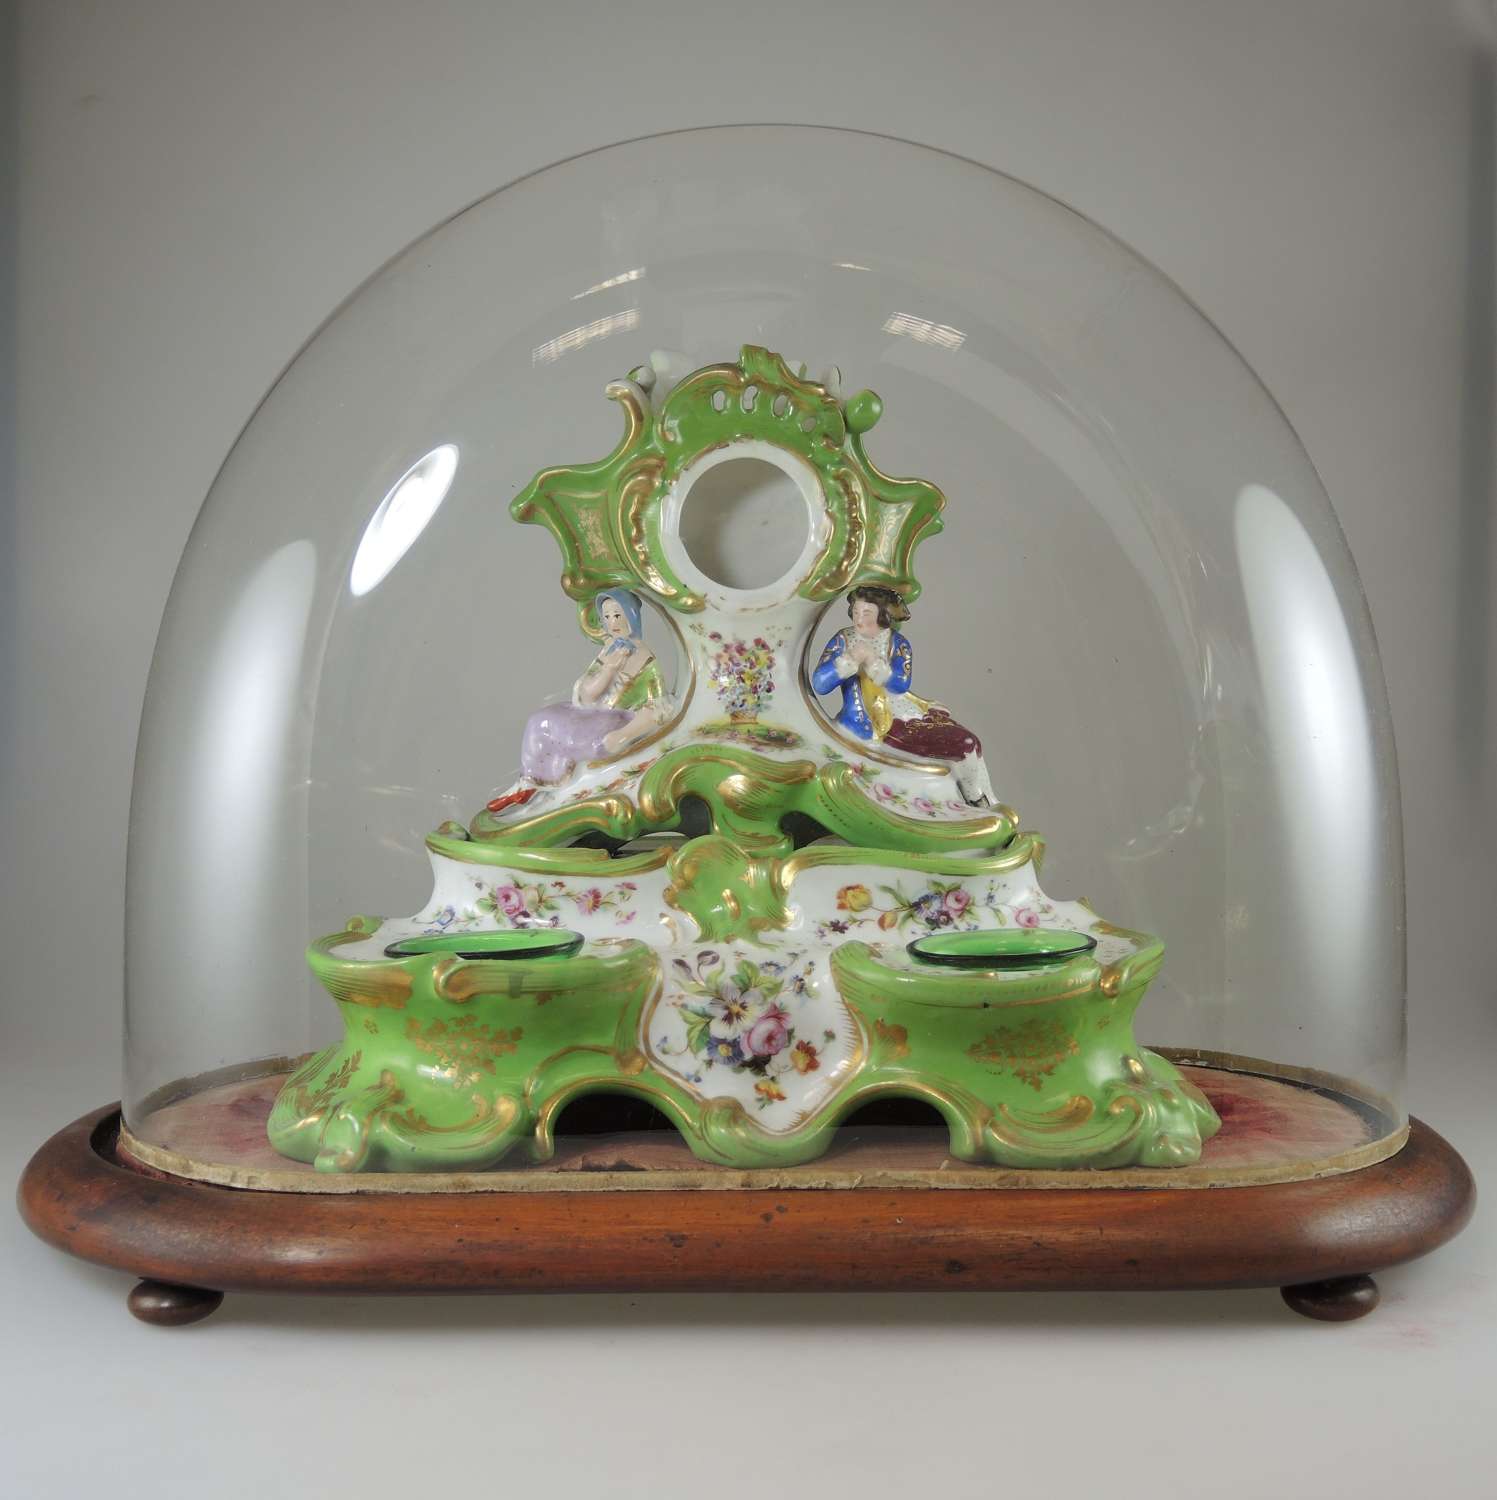 Large porcelain watch stand and desk compendium c1850